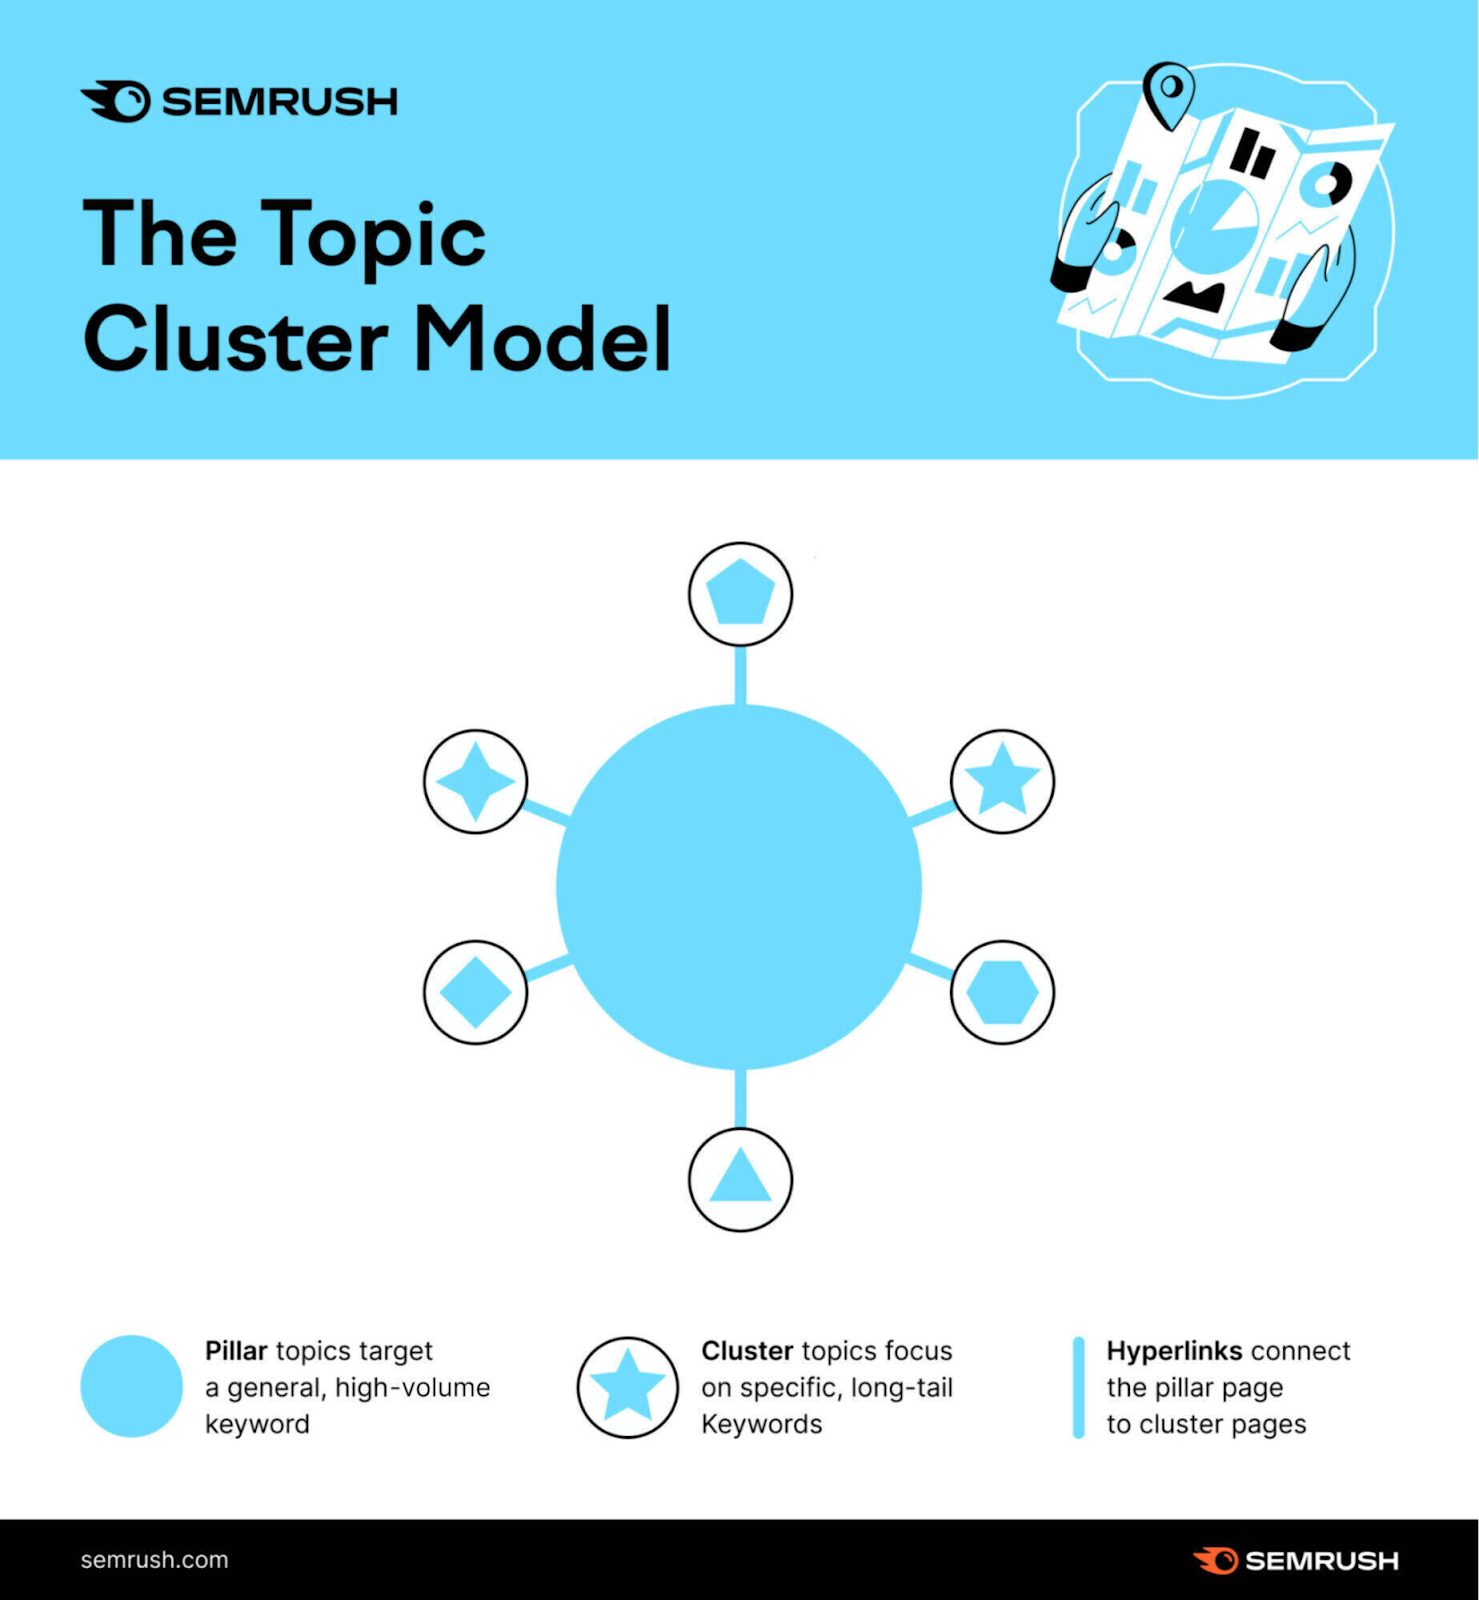 "The Topic C،er Model" infographic